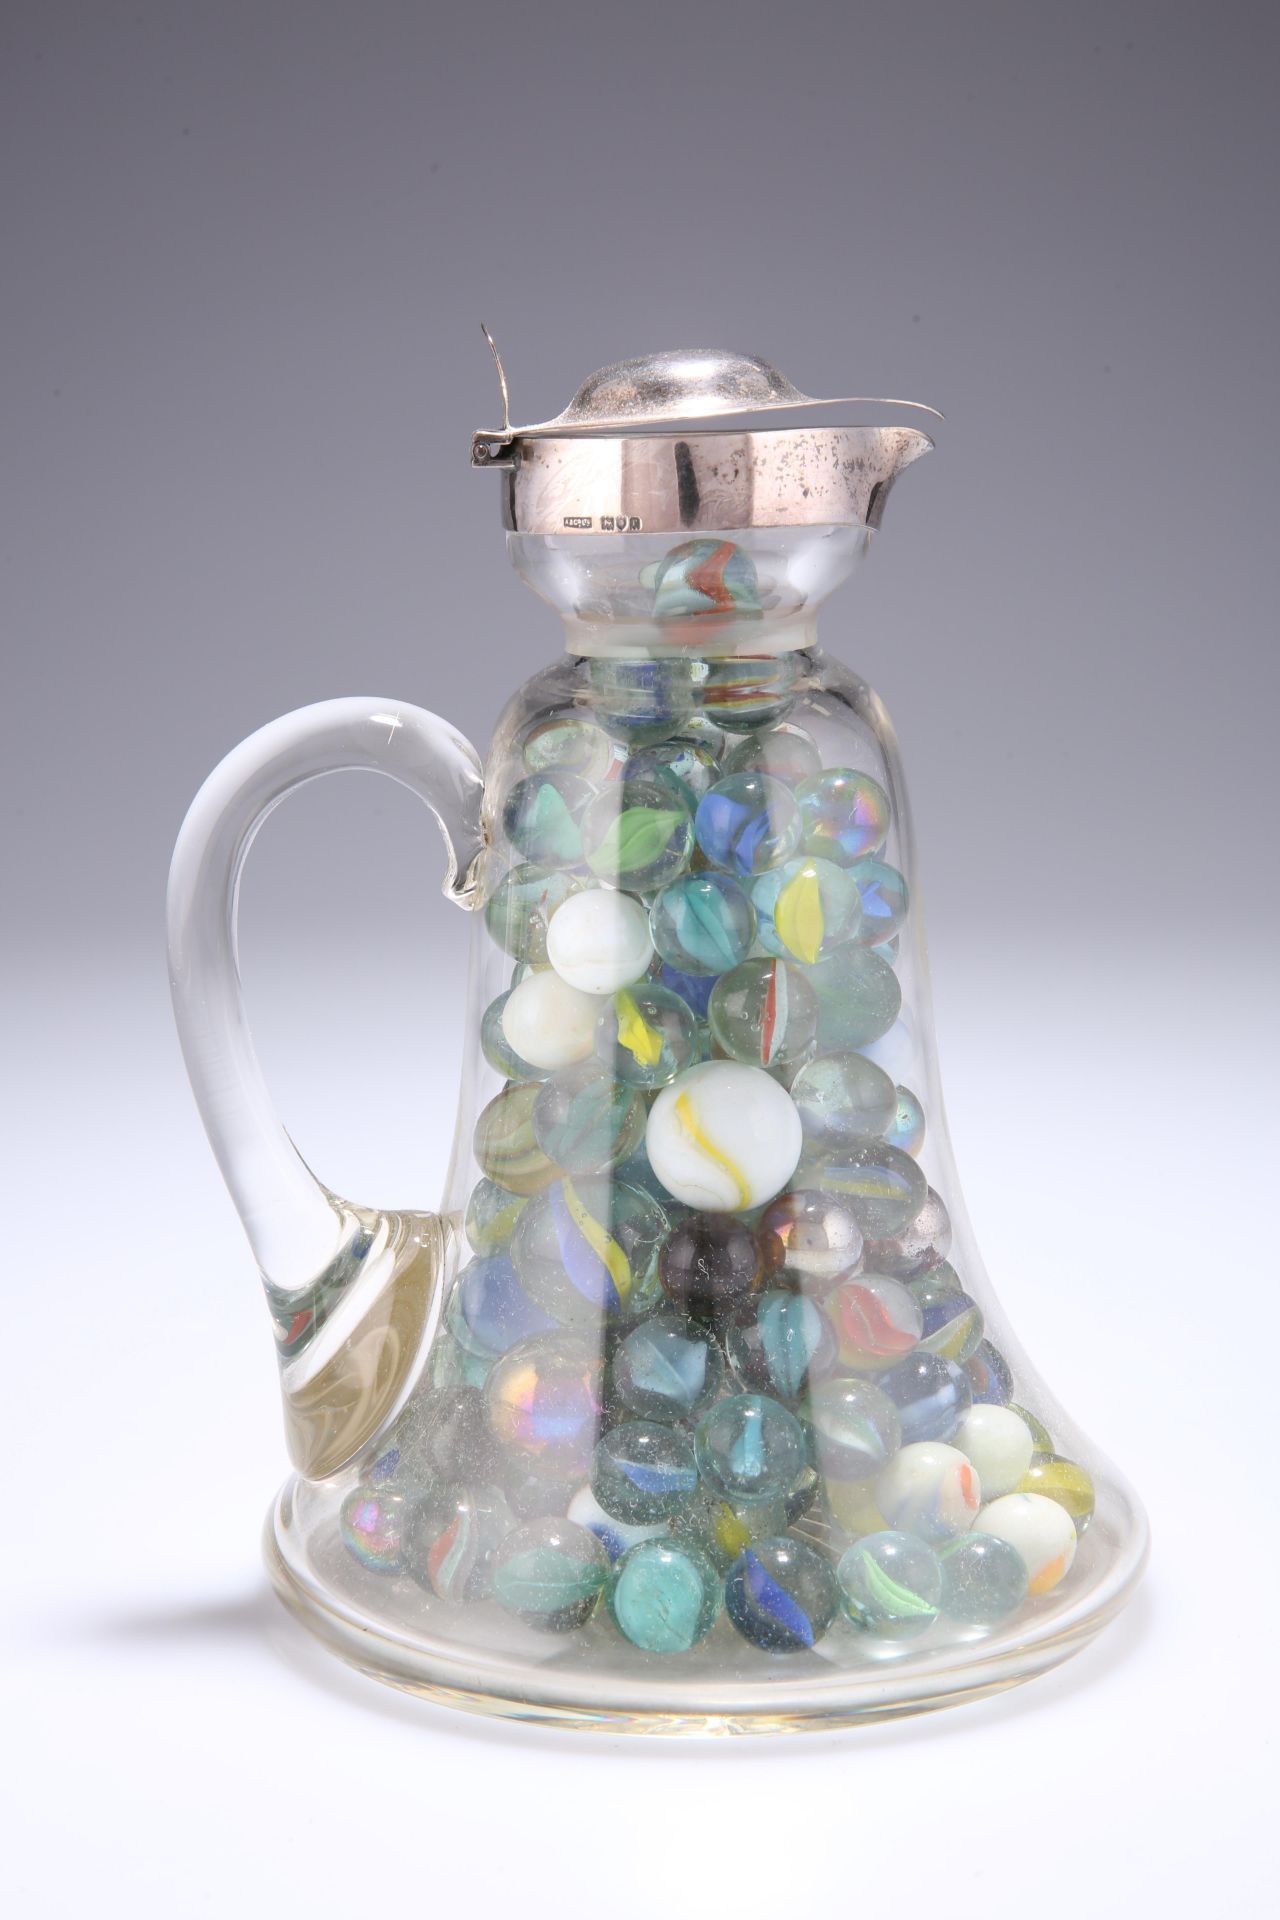 A GEORGE V SILVER-TOPPED CLARET JUG, Asprey & Co. Ltd., London 1912, the bell-shaped glass body with